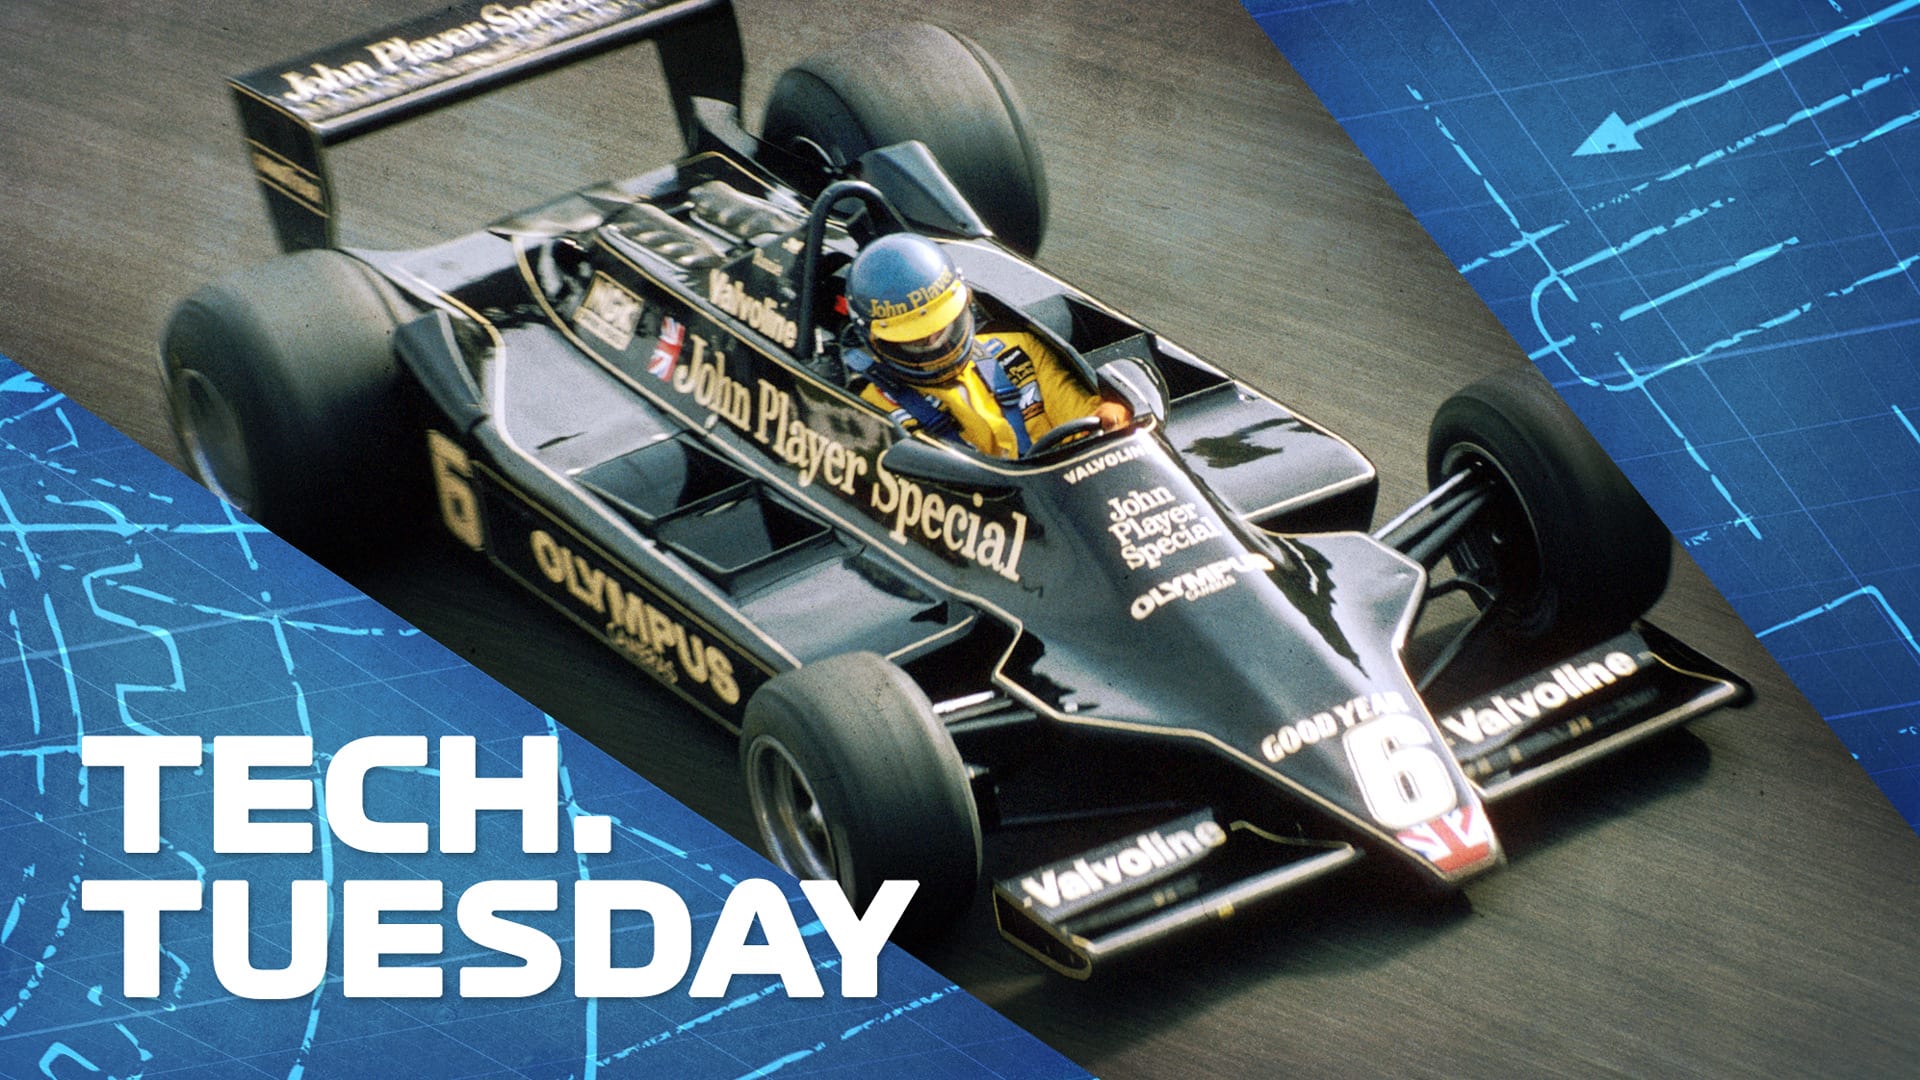 TECH TUESDAY The Lotus 79, F1s ground effect marvel Formula 1®